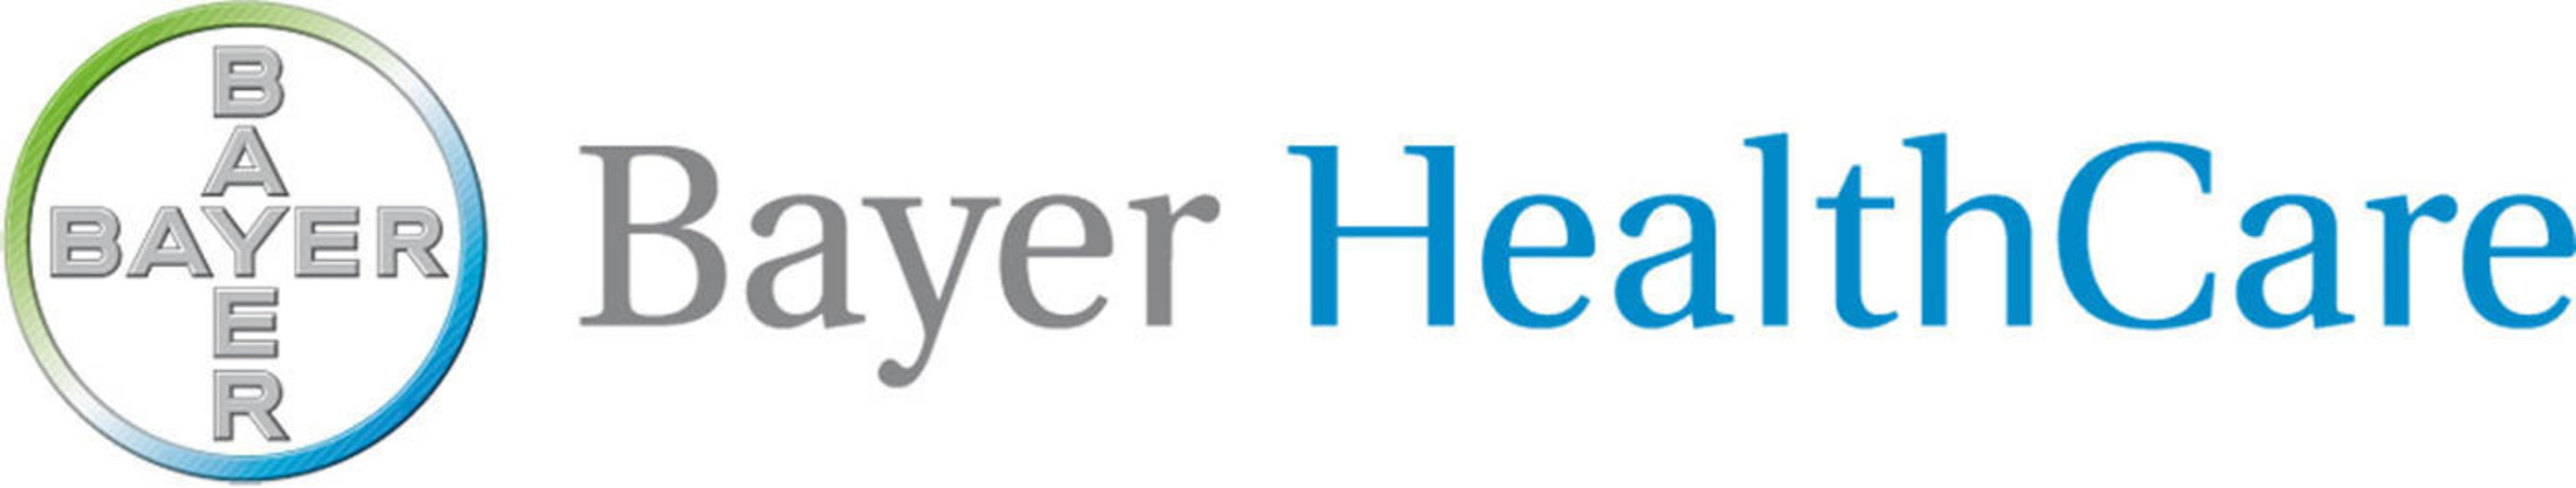 Bayer HealthCare completes acquisition of Teva Pharmaceutical Industries'  . animal health business